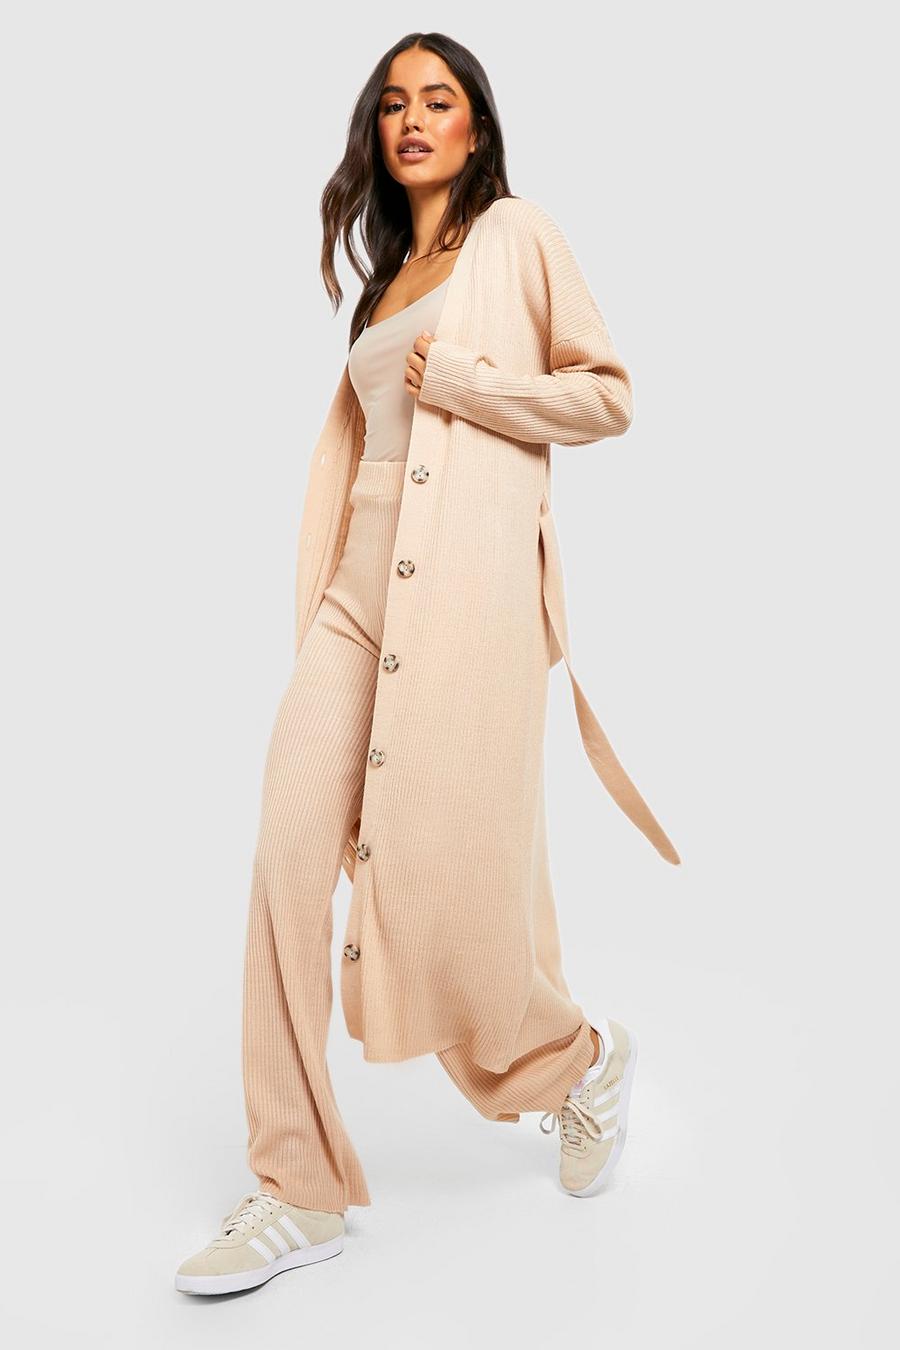 Stone beige Belted Maxi Cardigan Knitted Co-ord